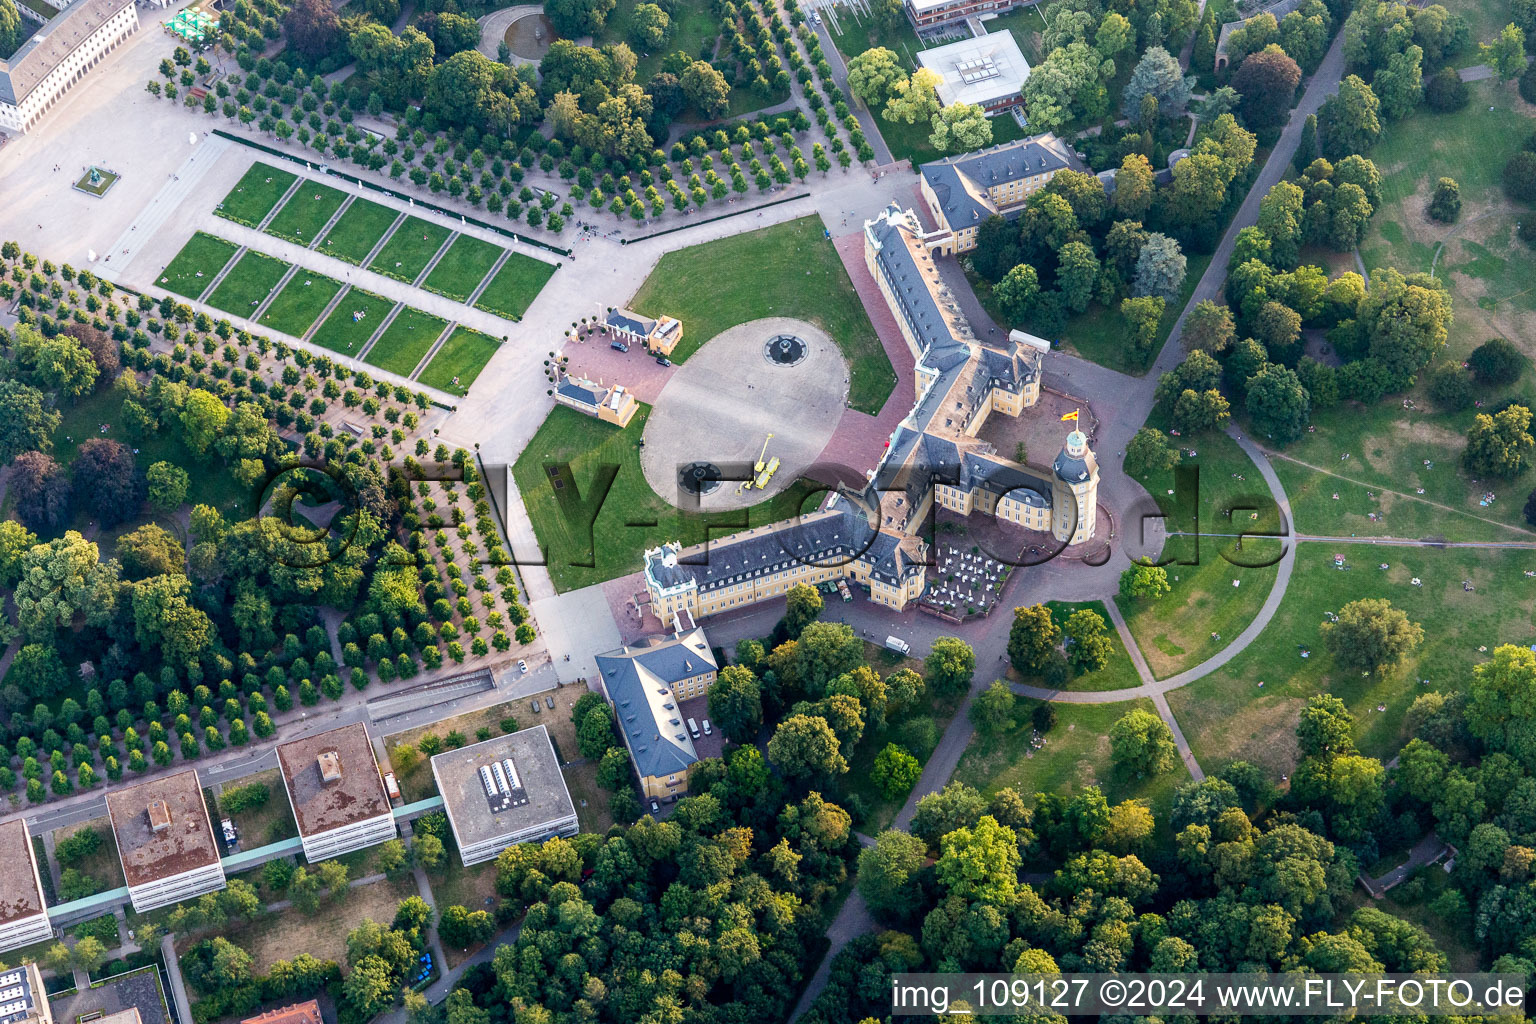 Aerial view of Building complex in the park of the castle Karlsruhe in Karlsruhe in the state Baden-Wurttemberg, Germany